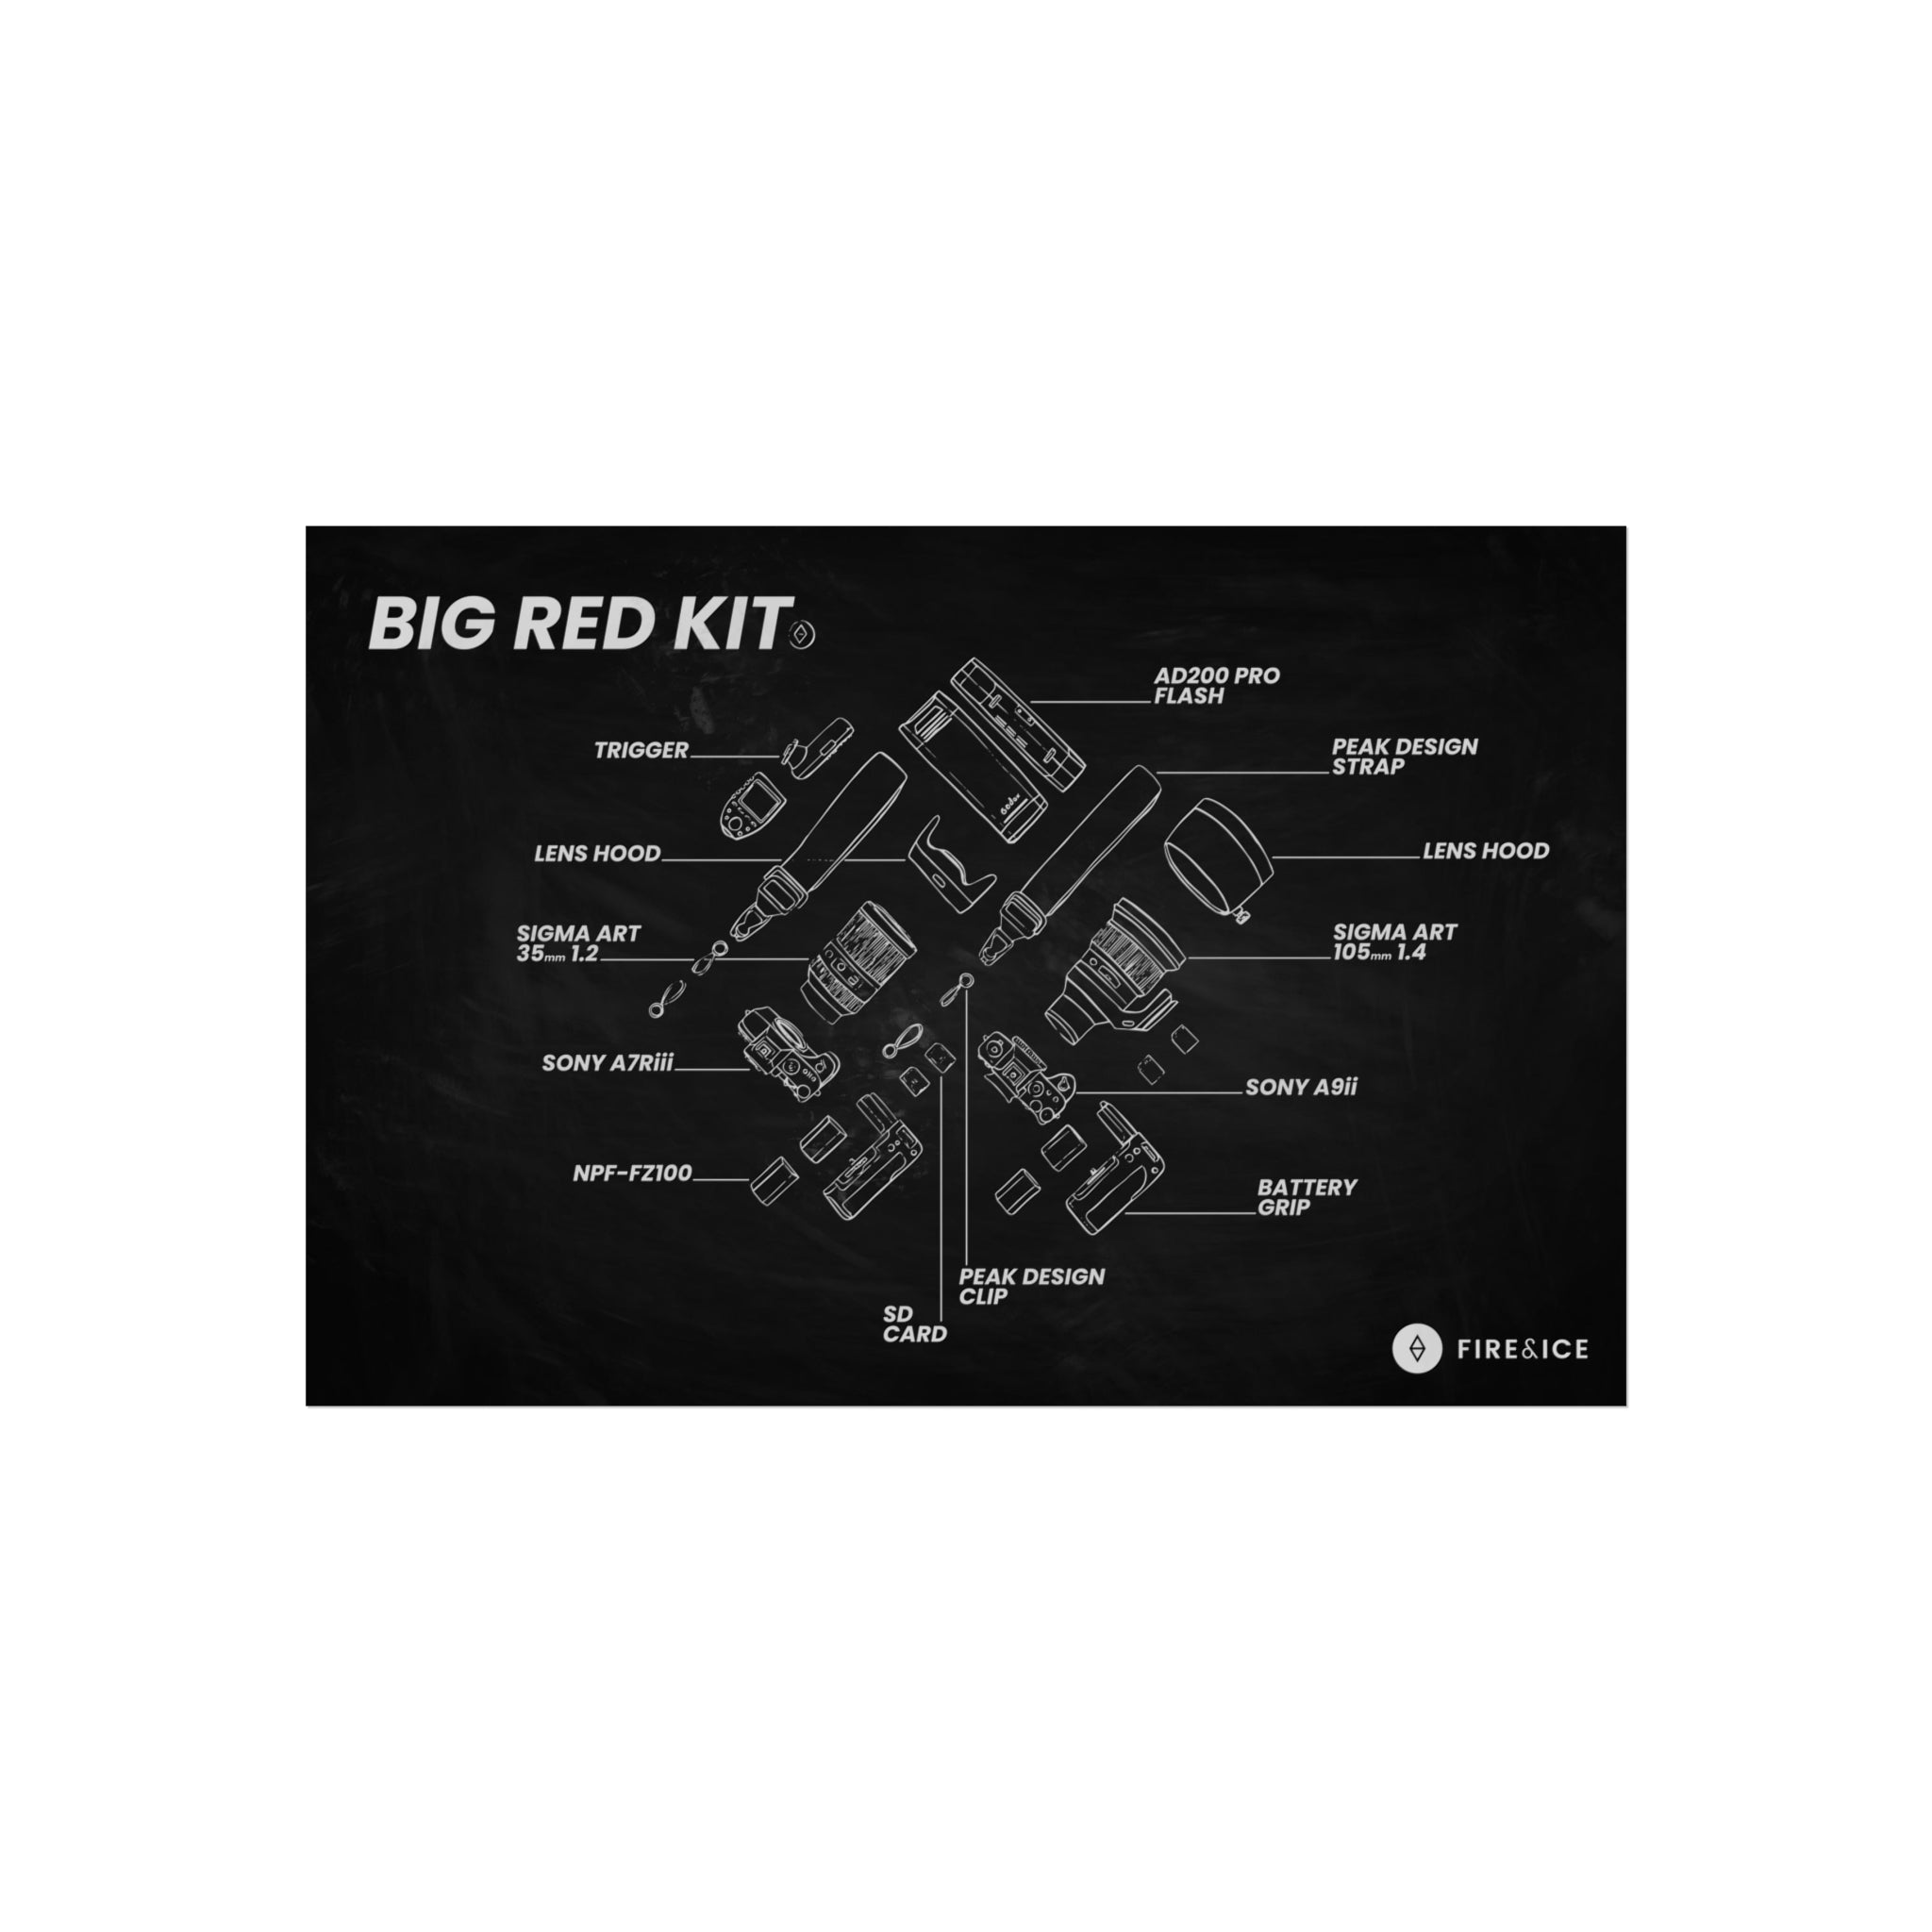 Big Red Kit Photography Poster